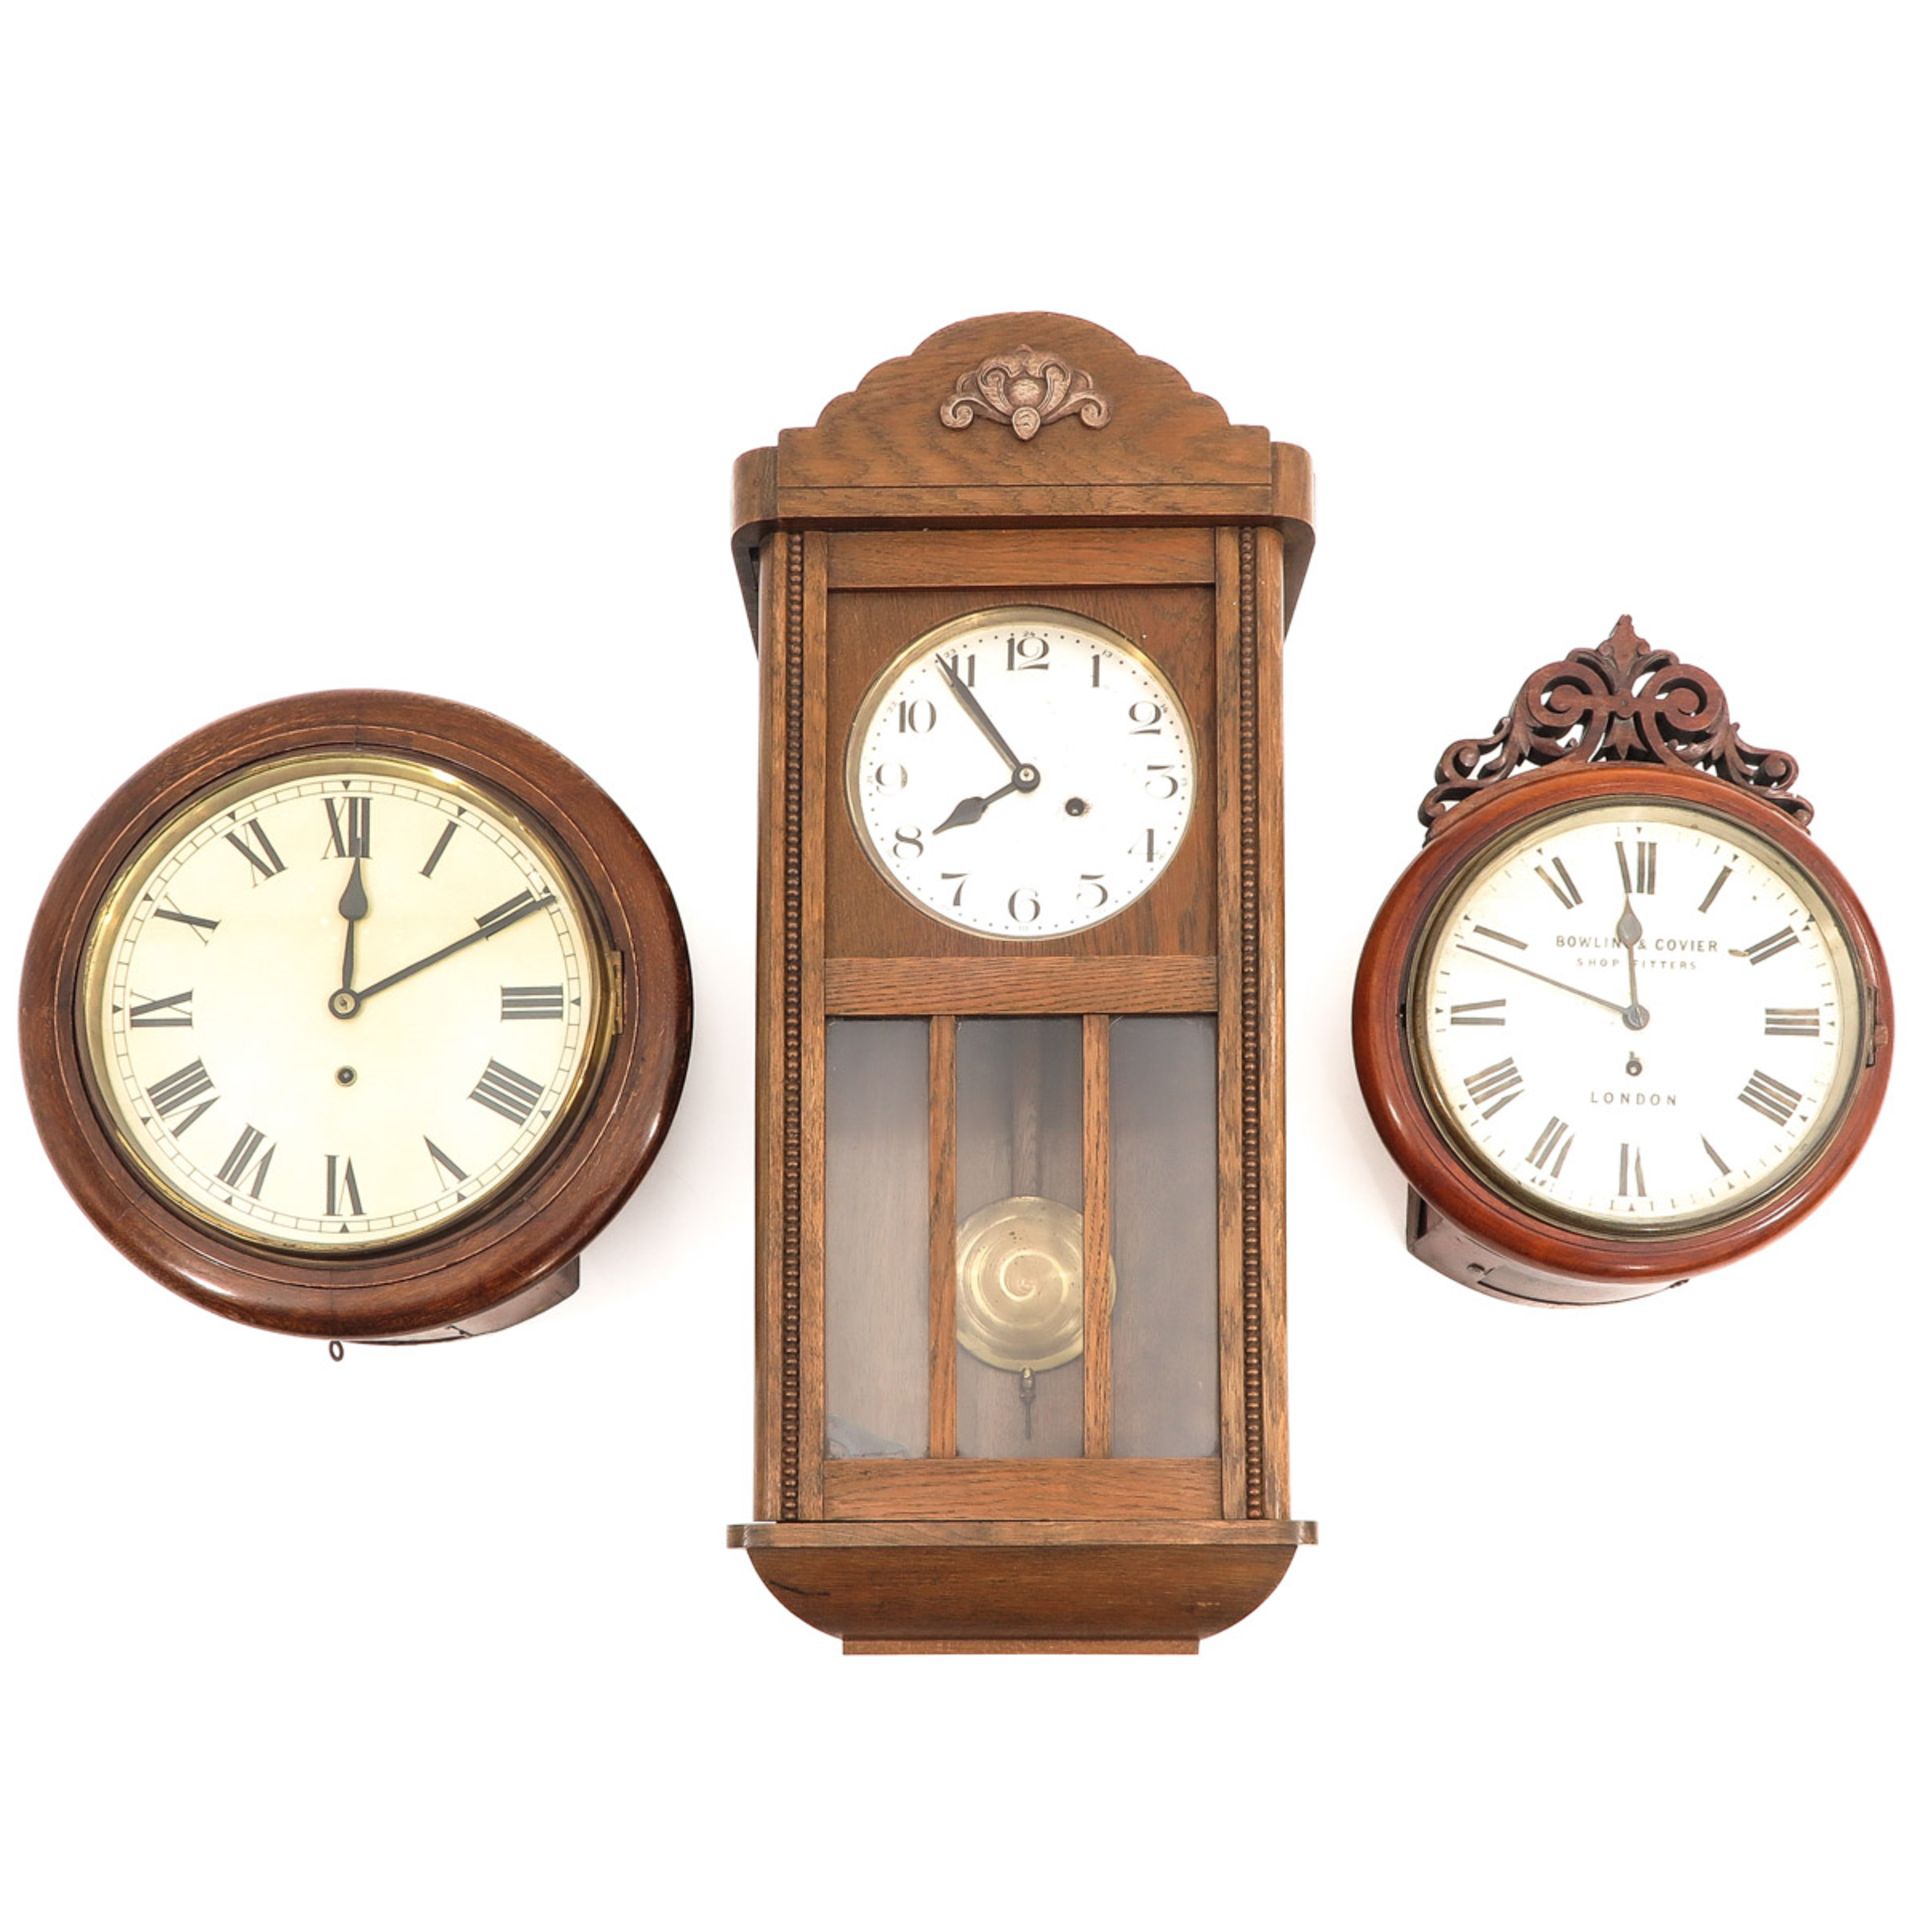 A Collection of 3 Wall Clocks